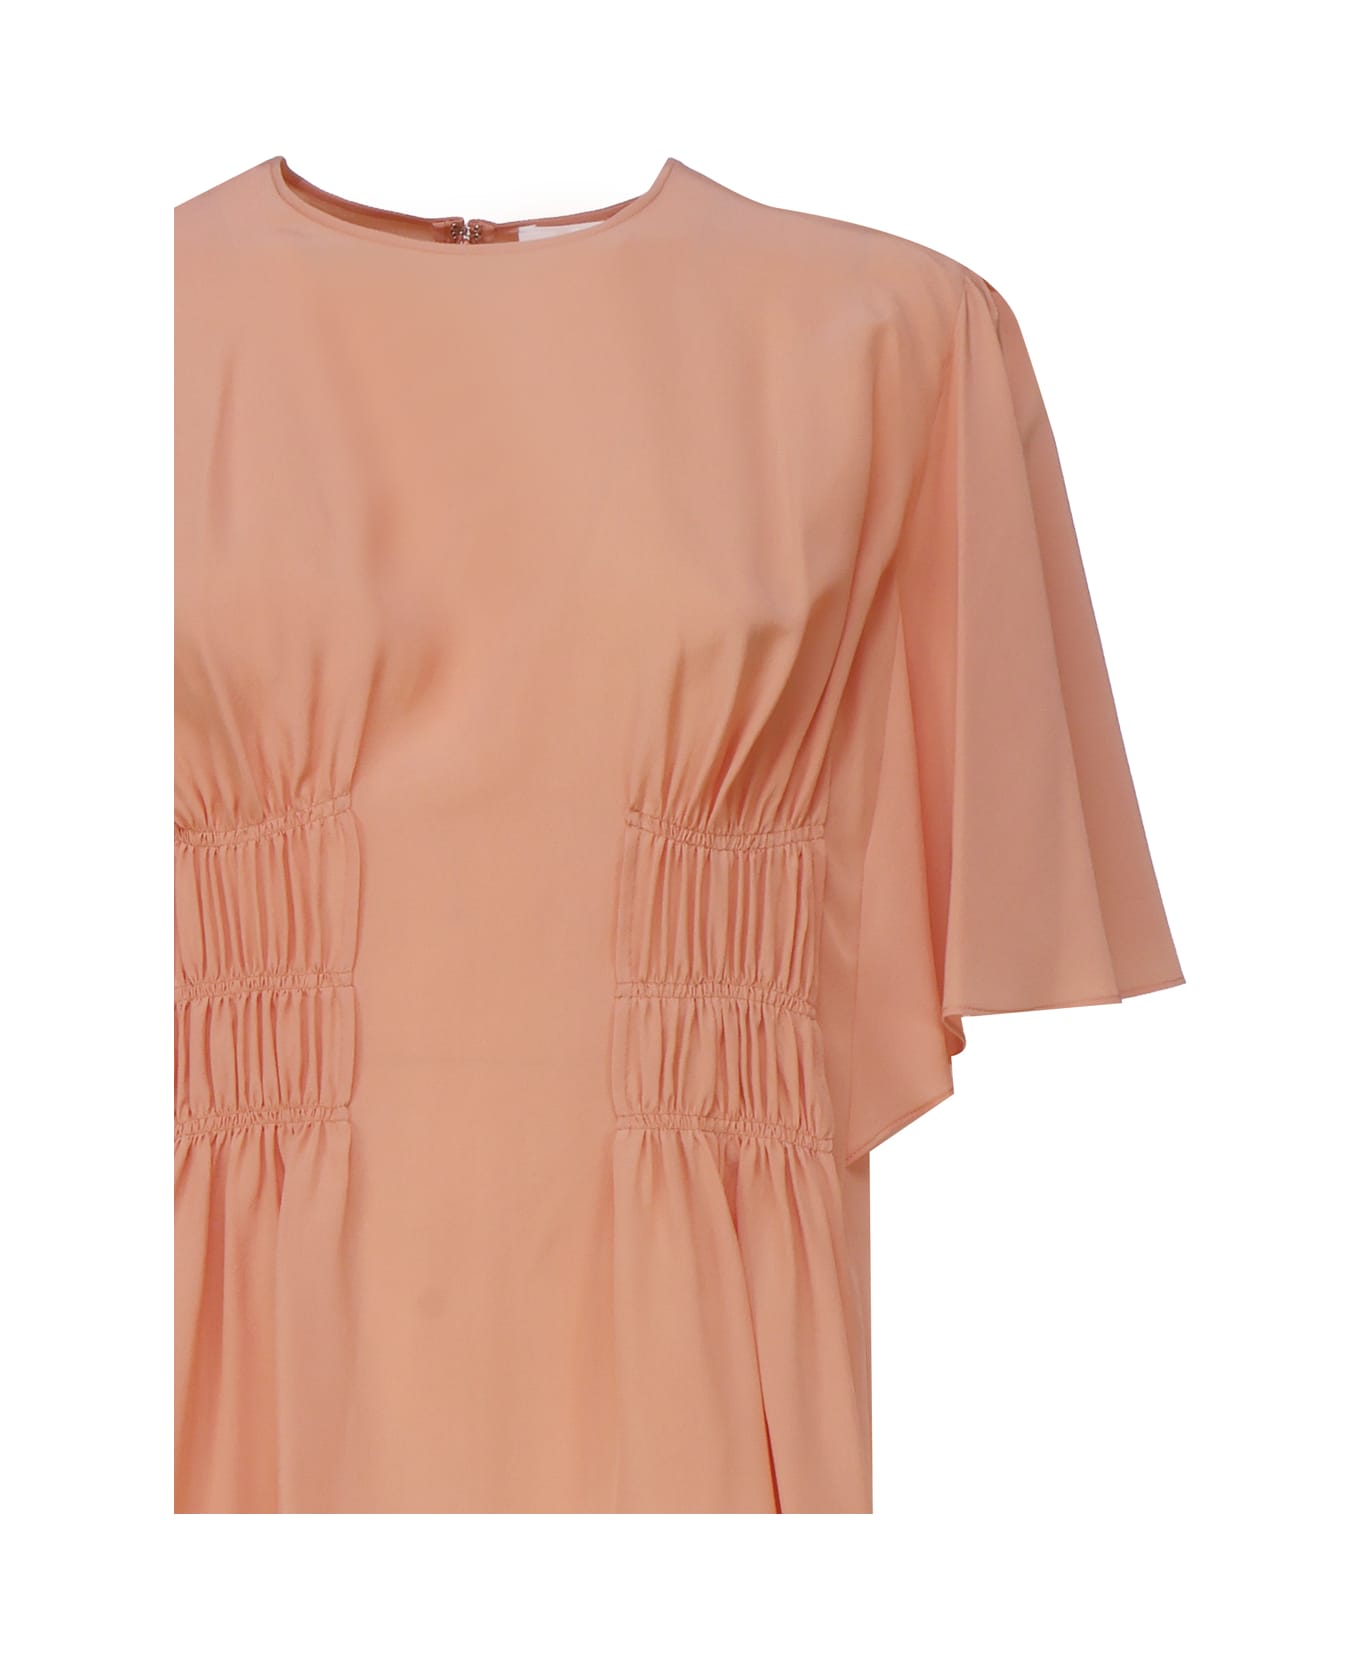 Chloé Top With Cap Sleeves - Pink フリース